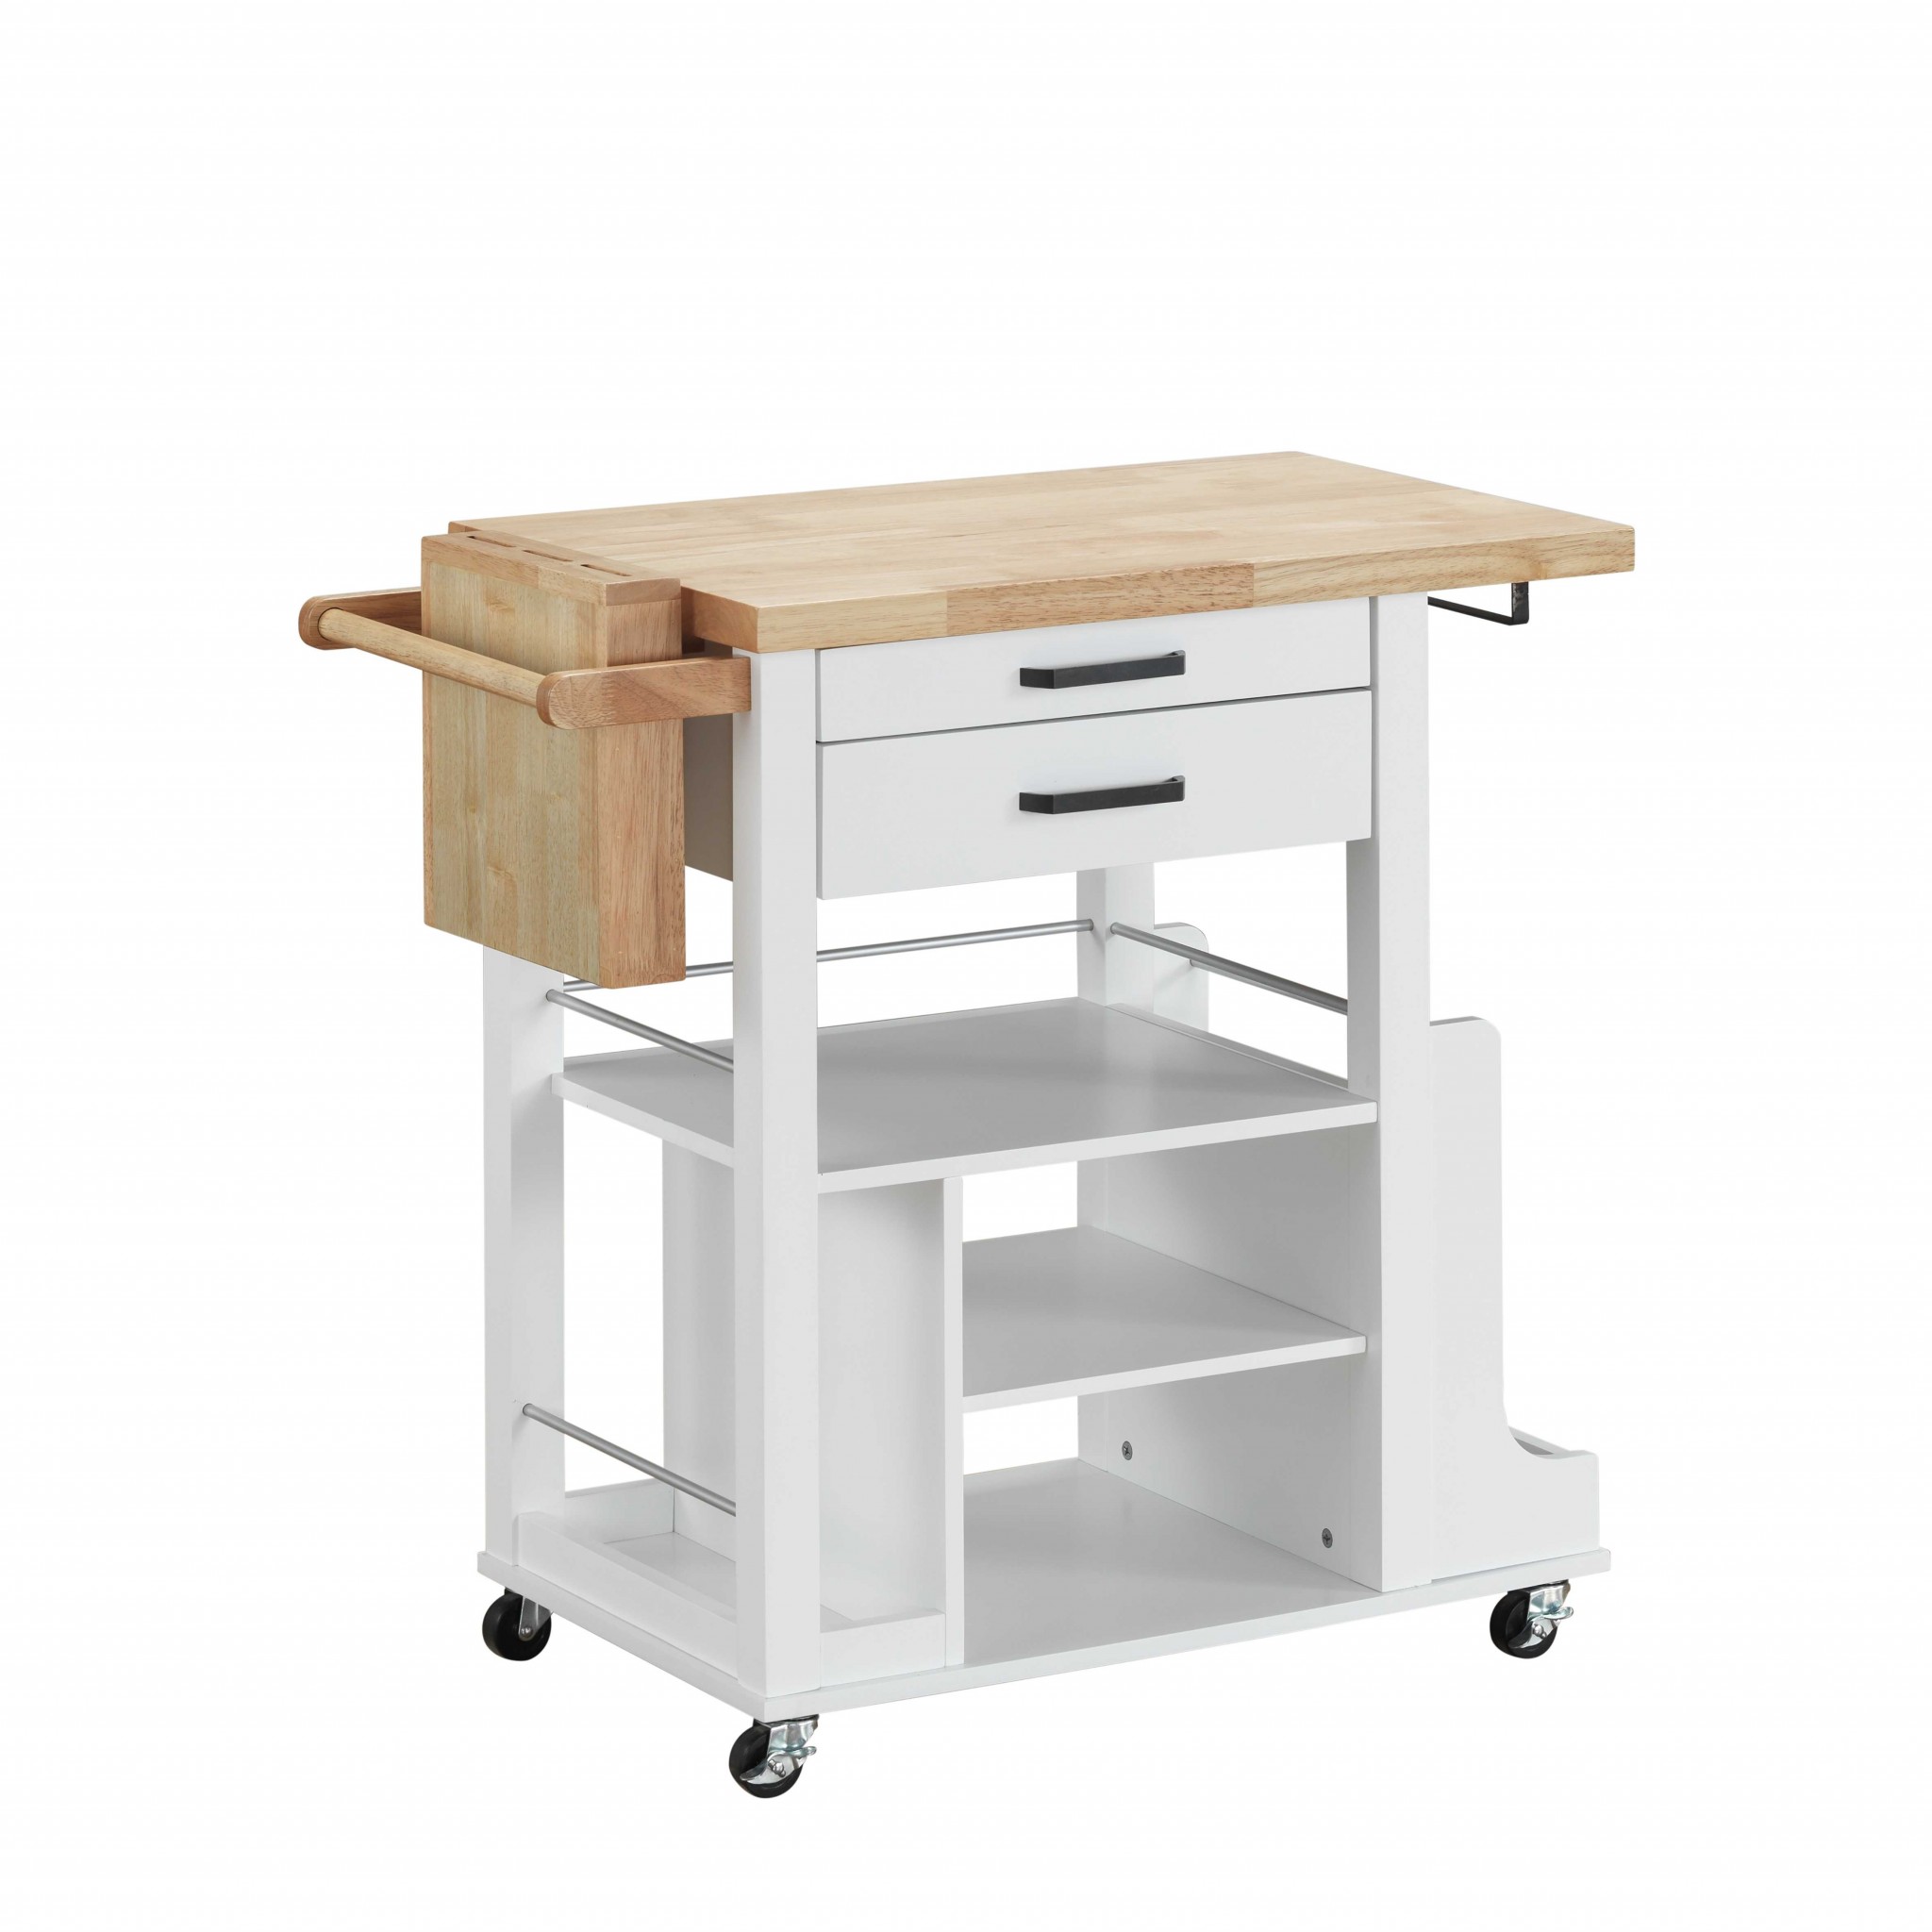 19" X 35" X 35" Natural White Wood Casters Kitchen Cart